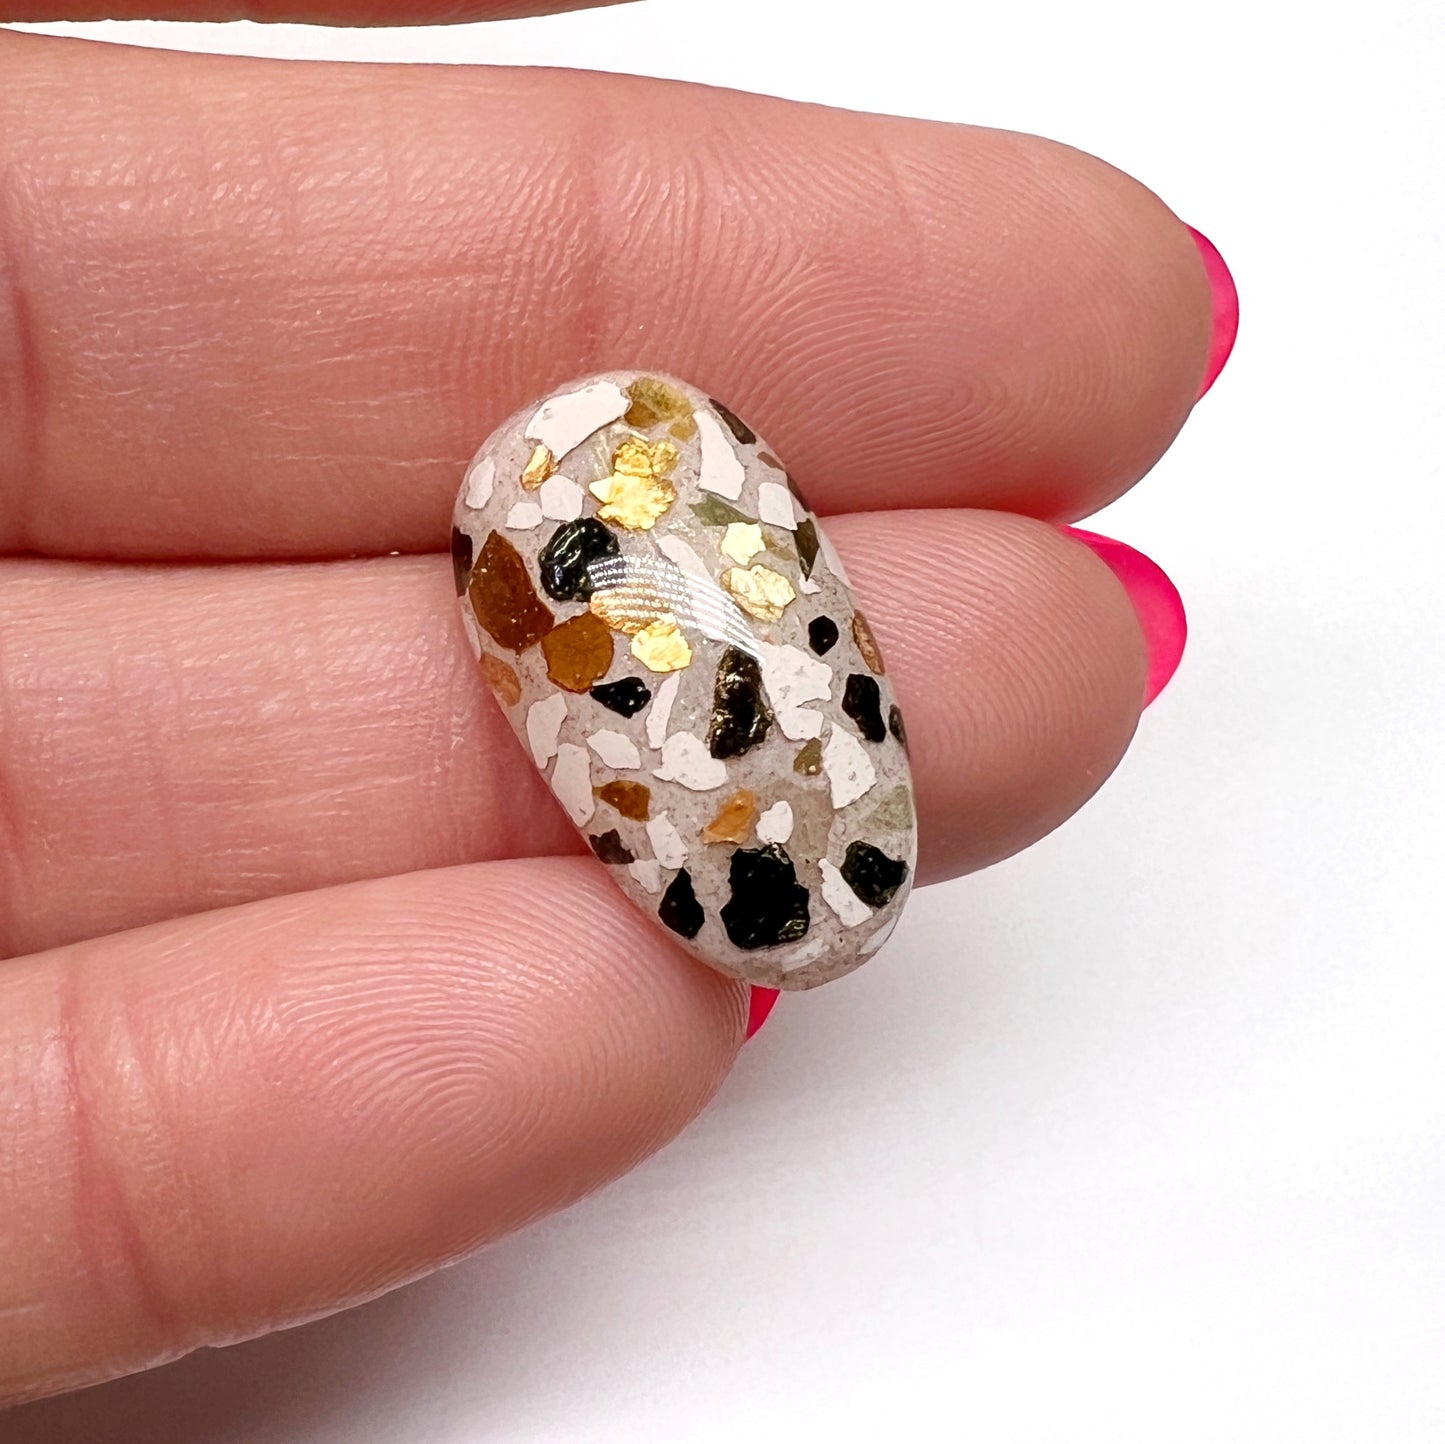 Multi-colored mica flakes for creating terrazzo style nail art. 